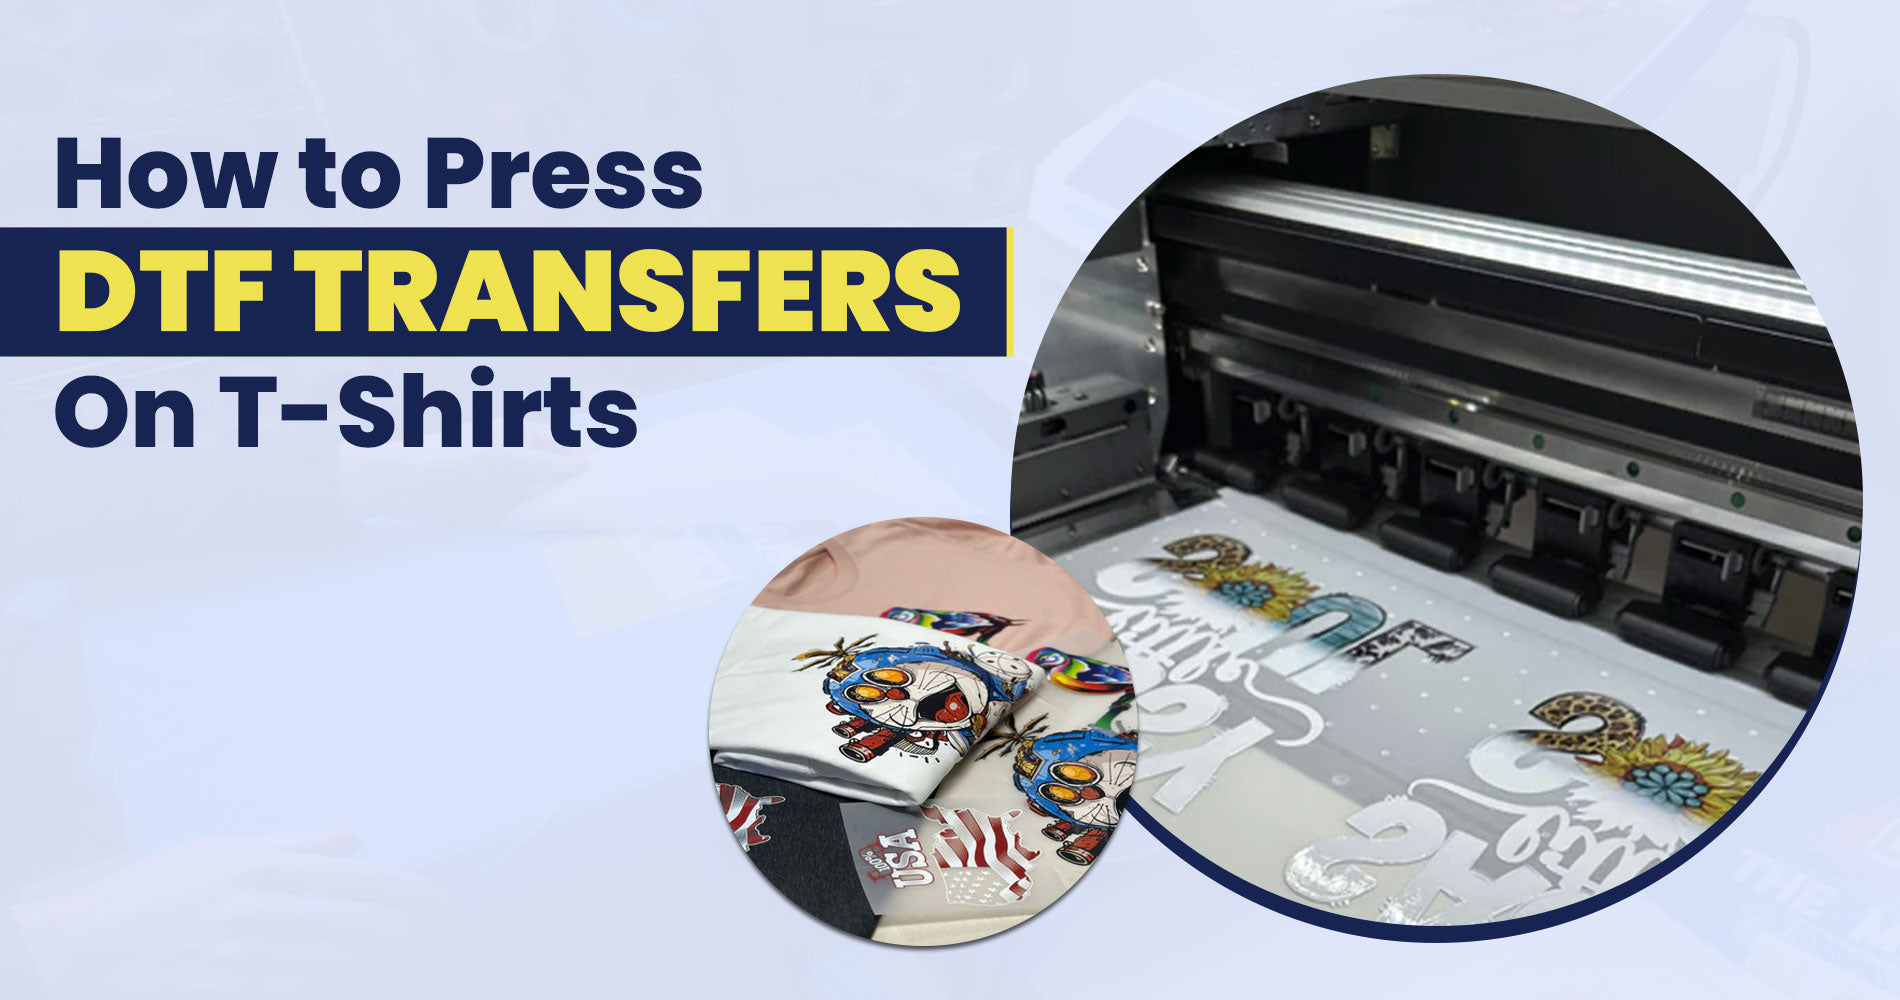 Choosing a Heat Press Machine for T-Shirts - The Ultimate Guide